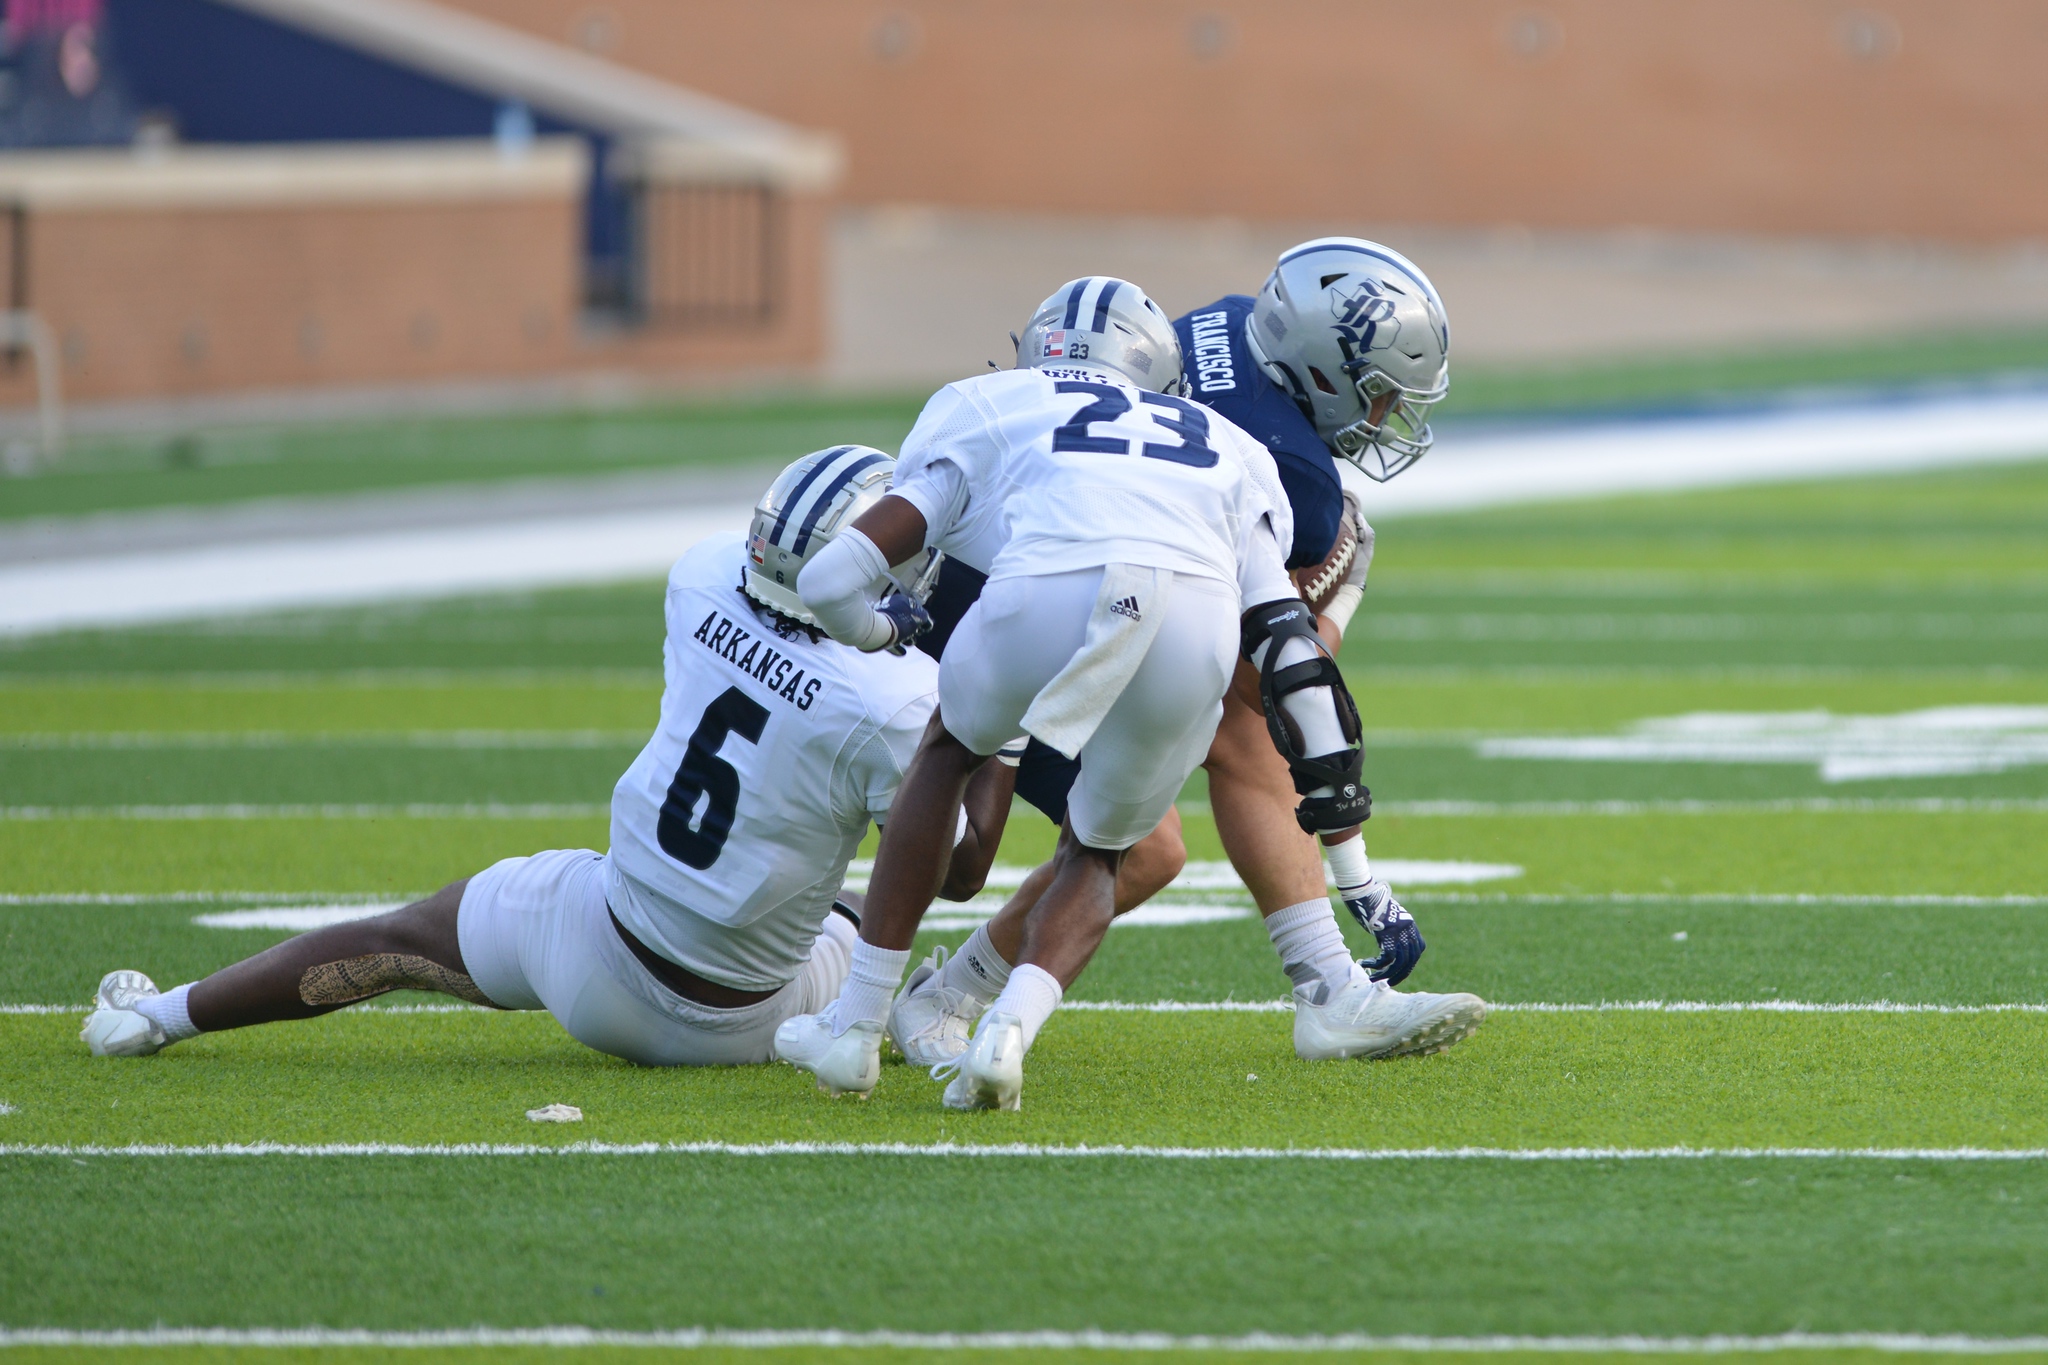 DJ Arkansas makes a tackle in the 2023 Rice Football Spring Game.